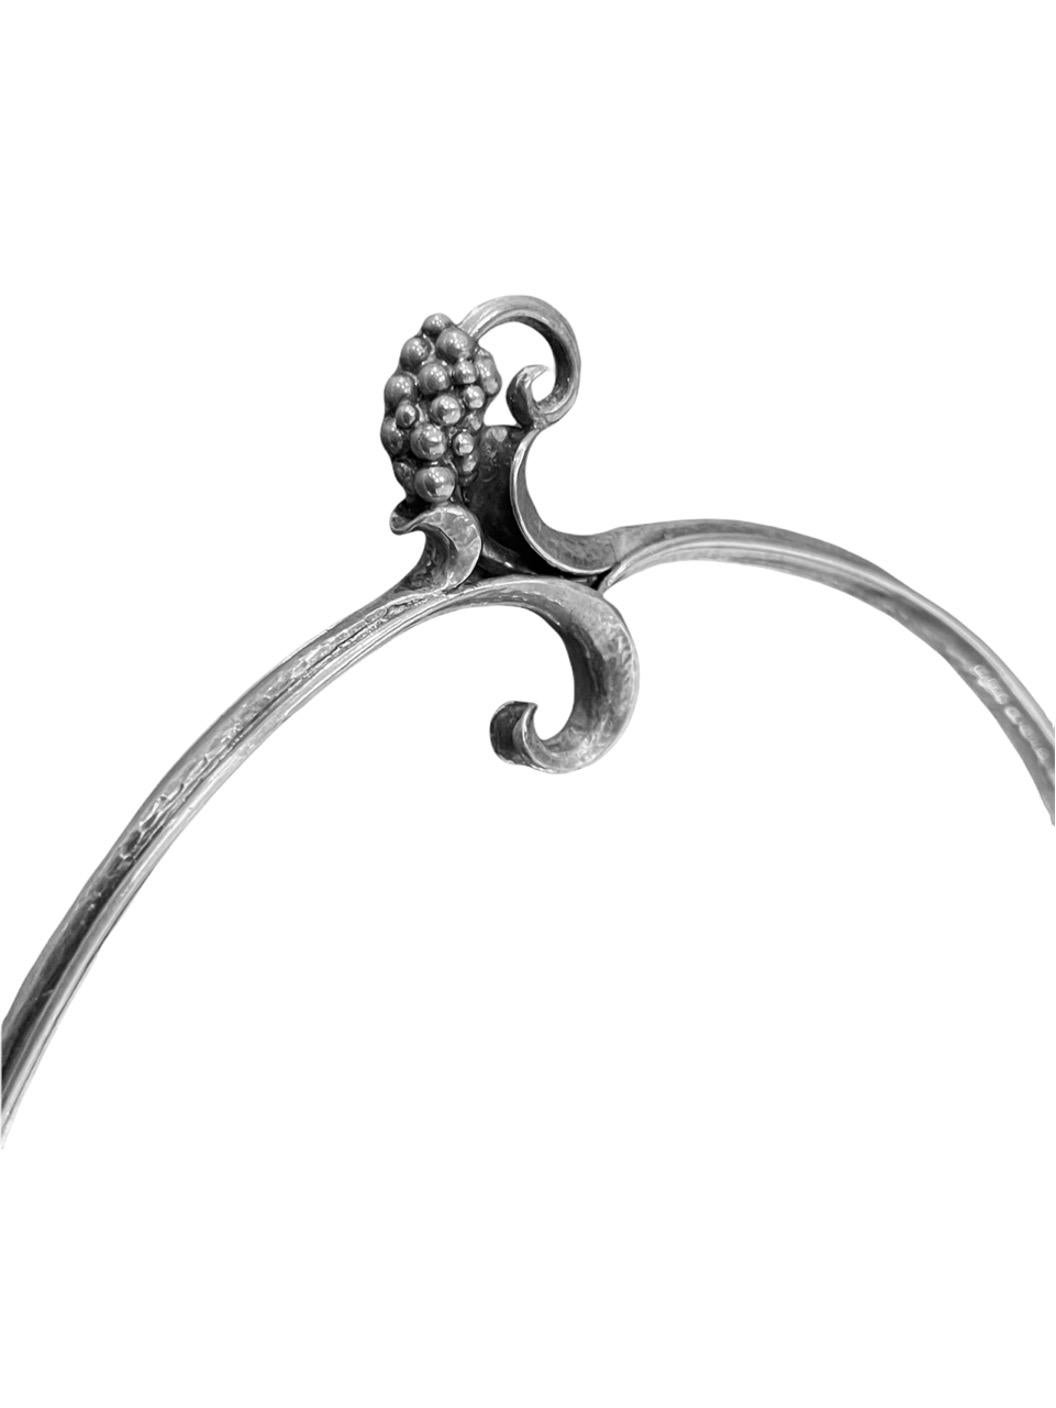 Georg Jensen Silversmithy 1997 Danish Silver Grape Stand by Harald Nielsen In Fair Condition For Sale In North Miami, FL